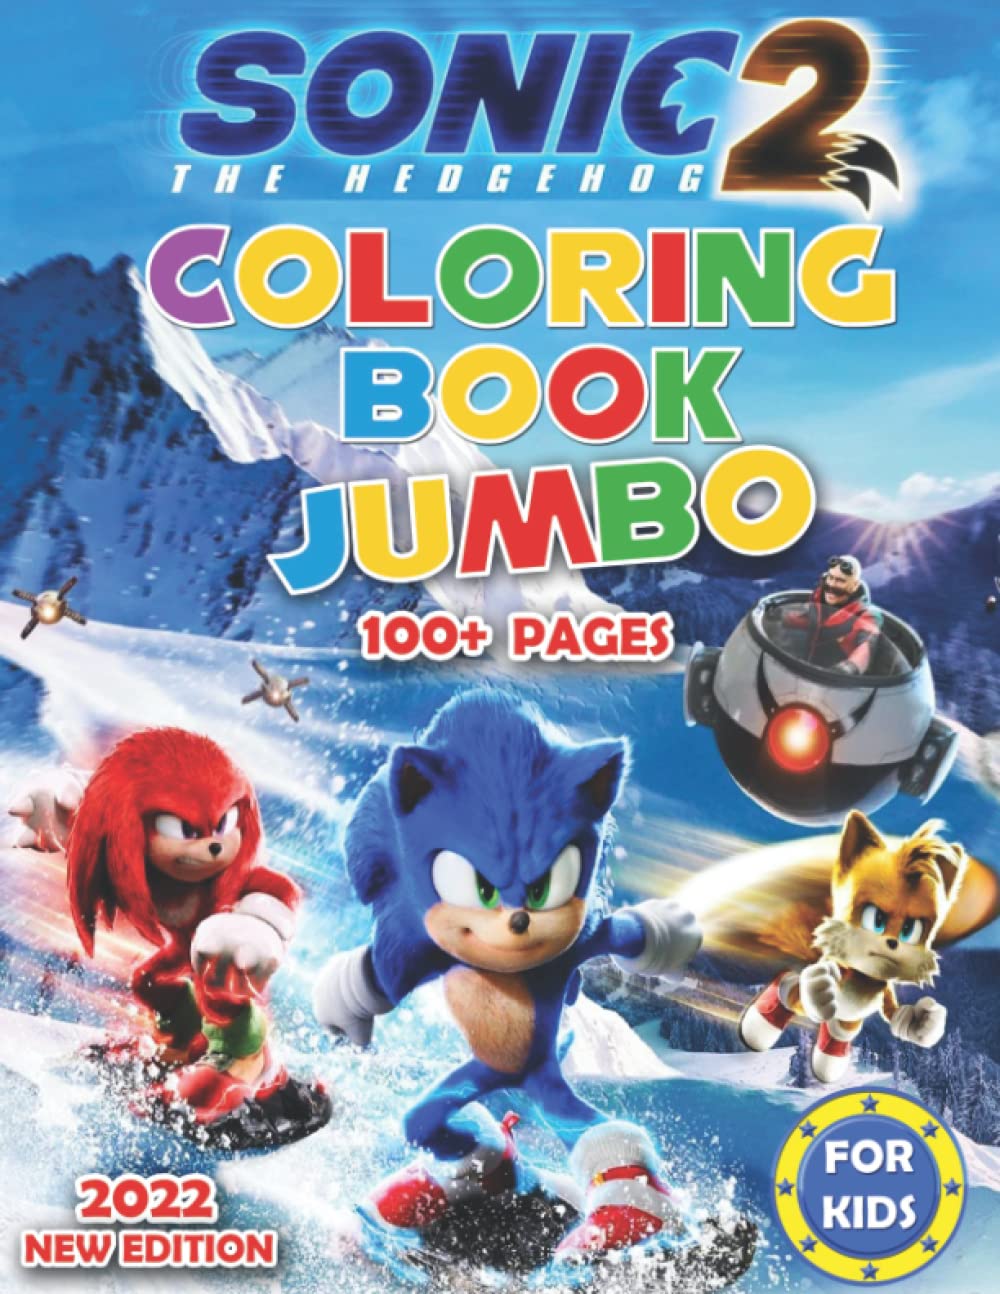 Buy sãnic the hedgehog colorg book new edition fun sãnic colorg books for kids toddlers boys exclusive sãnic the hedgehog movie illsturations sãnic gift onle at dia